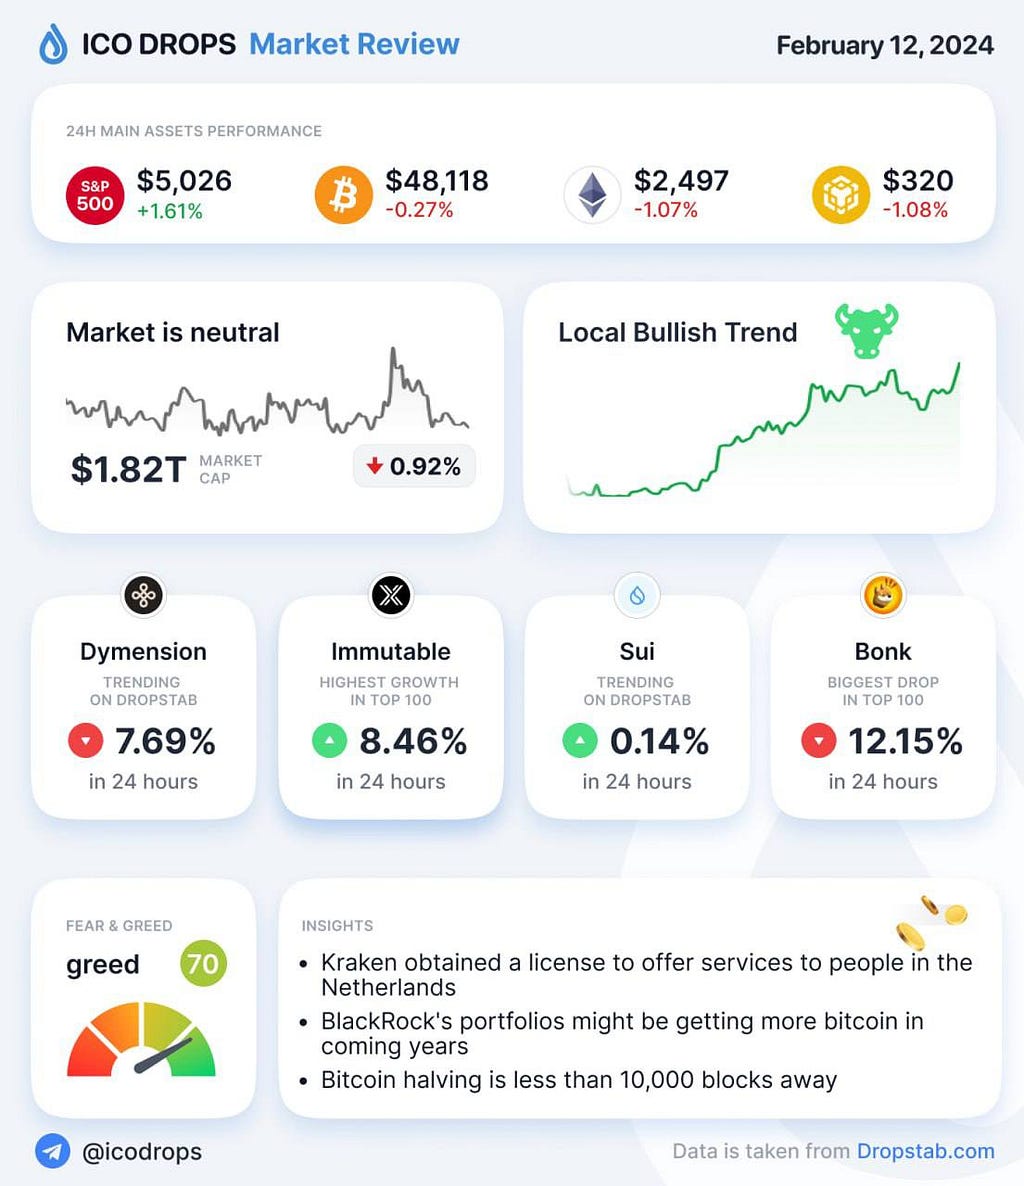 Market review showing asset performance with S&P 500 up, Bitcoin slightly down, Ethereum down, overall market cap slightly decreased, individual crypto asset trends, a high Fear & Greed index, and financial insights including Kraken’s licensing and Bitcoin halving proximity.